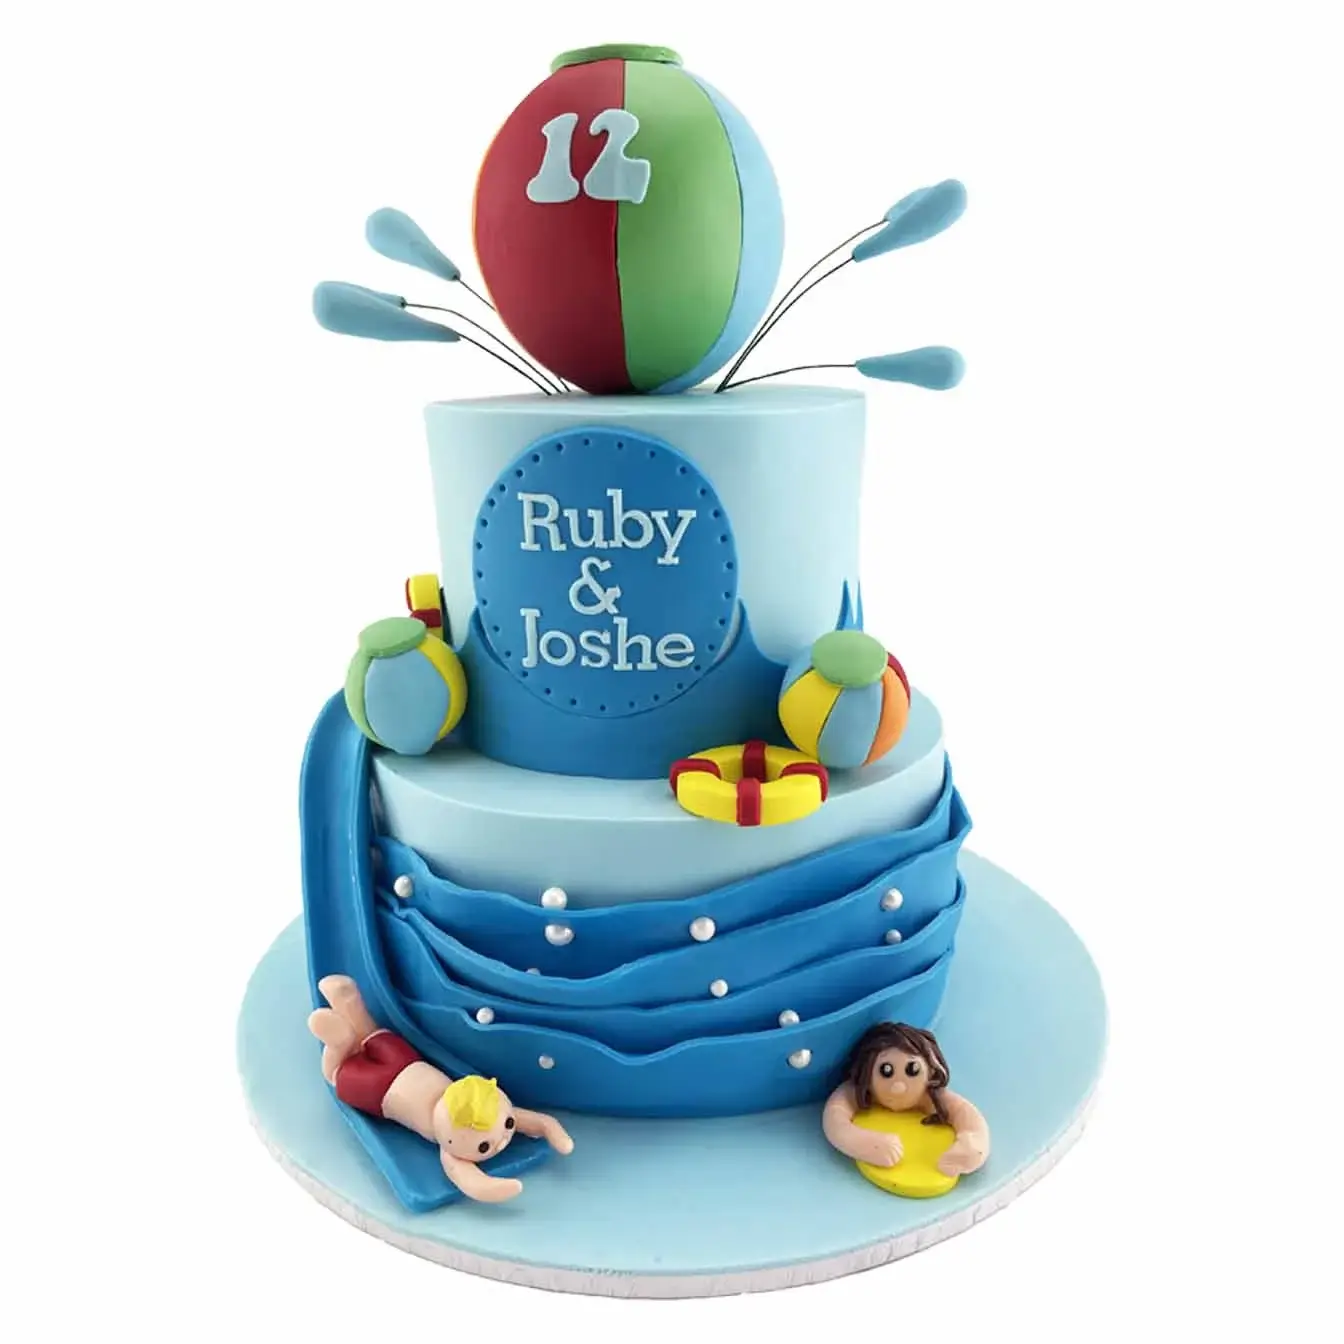 Splashin' Pool Party Cake - A two-tier blue iced cake with a waterslide and beachballs, bringing the fun and excitement of an Aussie pool party to your celebration.